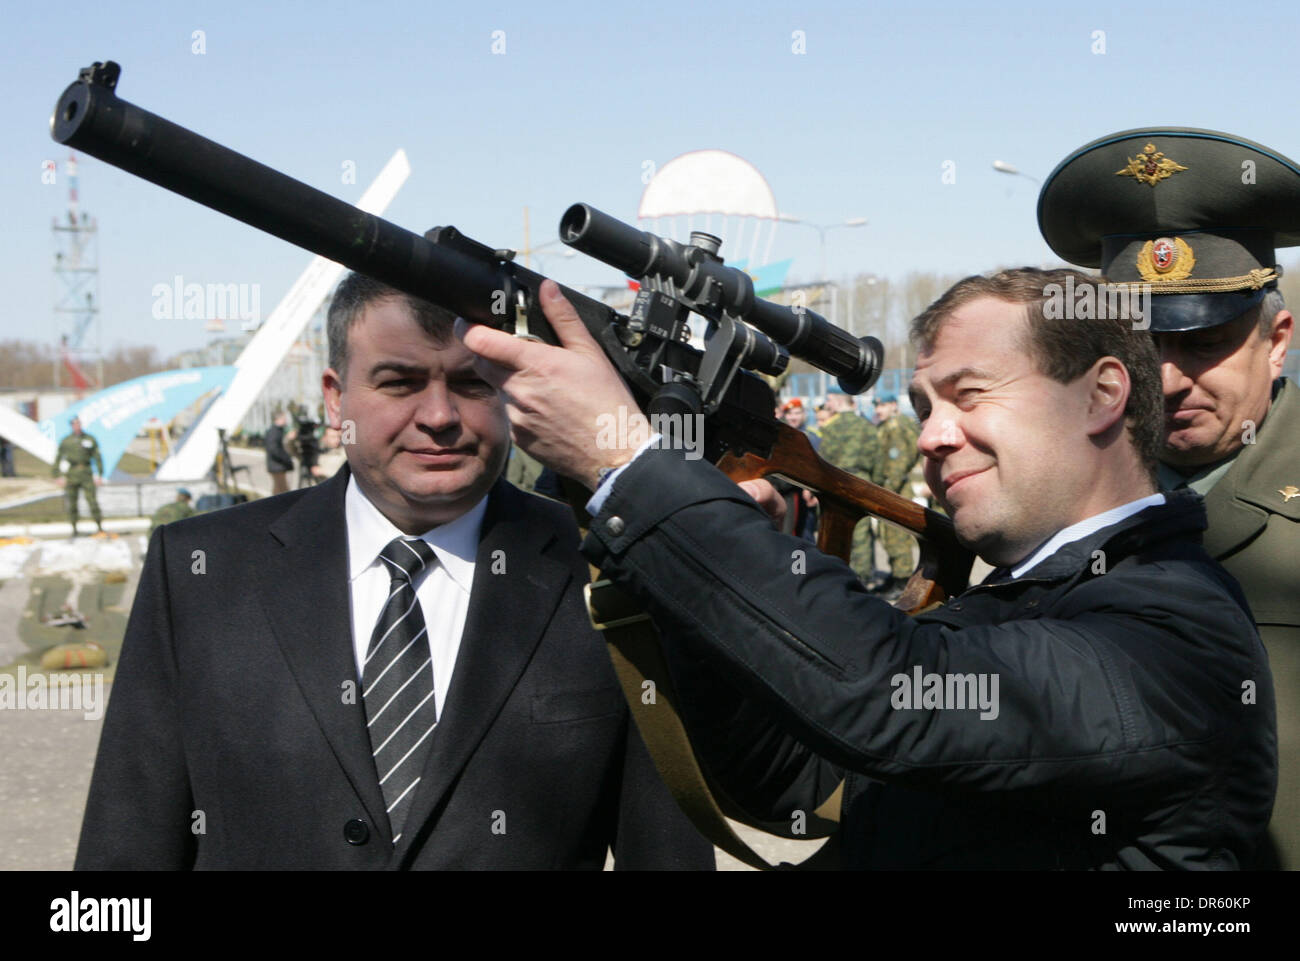 Apr 22, 2009 - Ryazan, Russia - President of Russia DMITRY MEDVEDEV checks out a sniper rifle while Russian Defense Minister ANATOLY SERDYUKOV (L) look on during a visit to Ryazan paratrooper military academy. (Credit Image: © PhotoXpress/ZUMA Press) Stock Photo